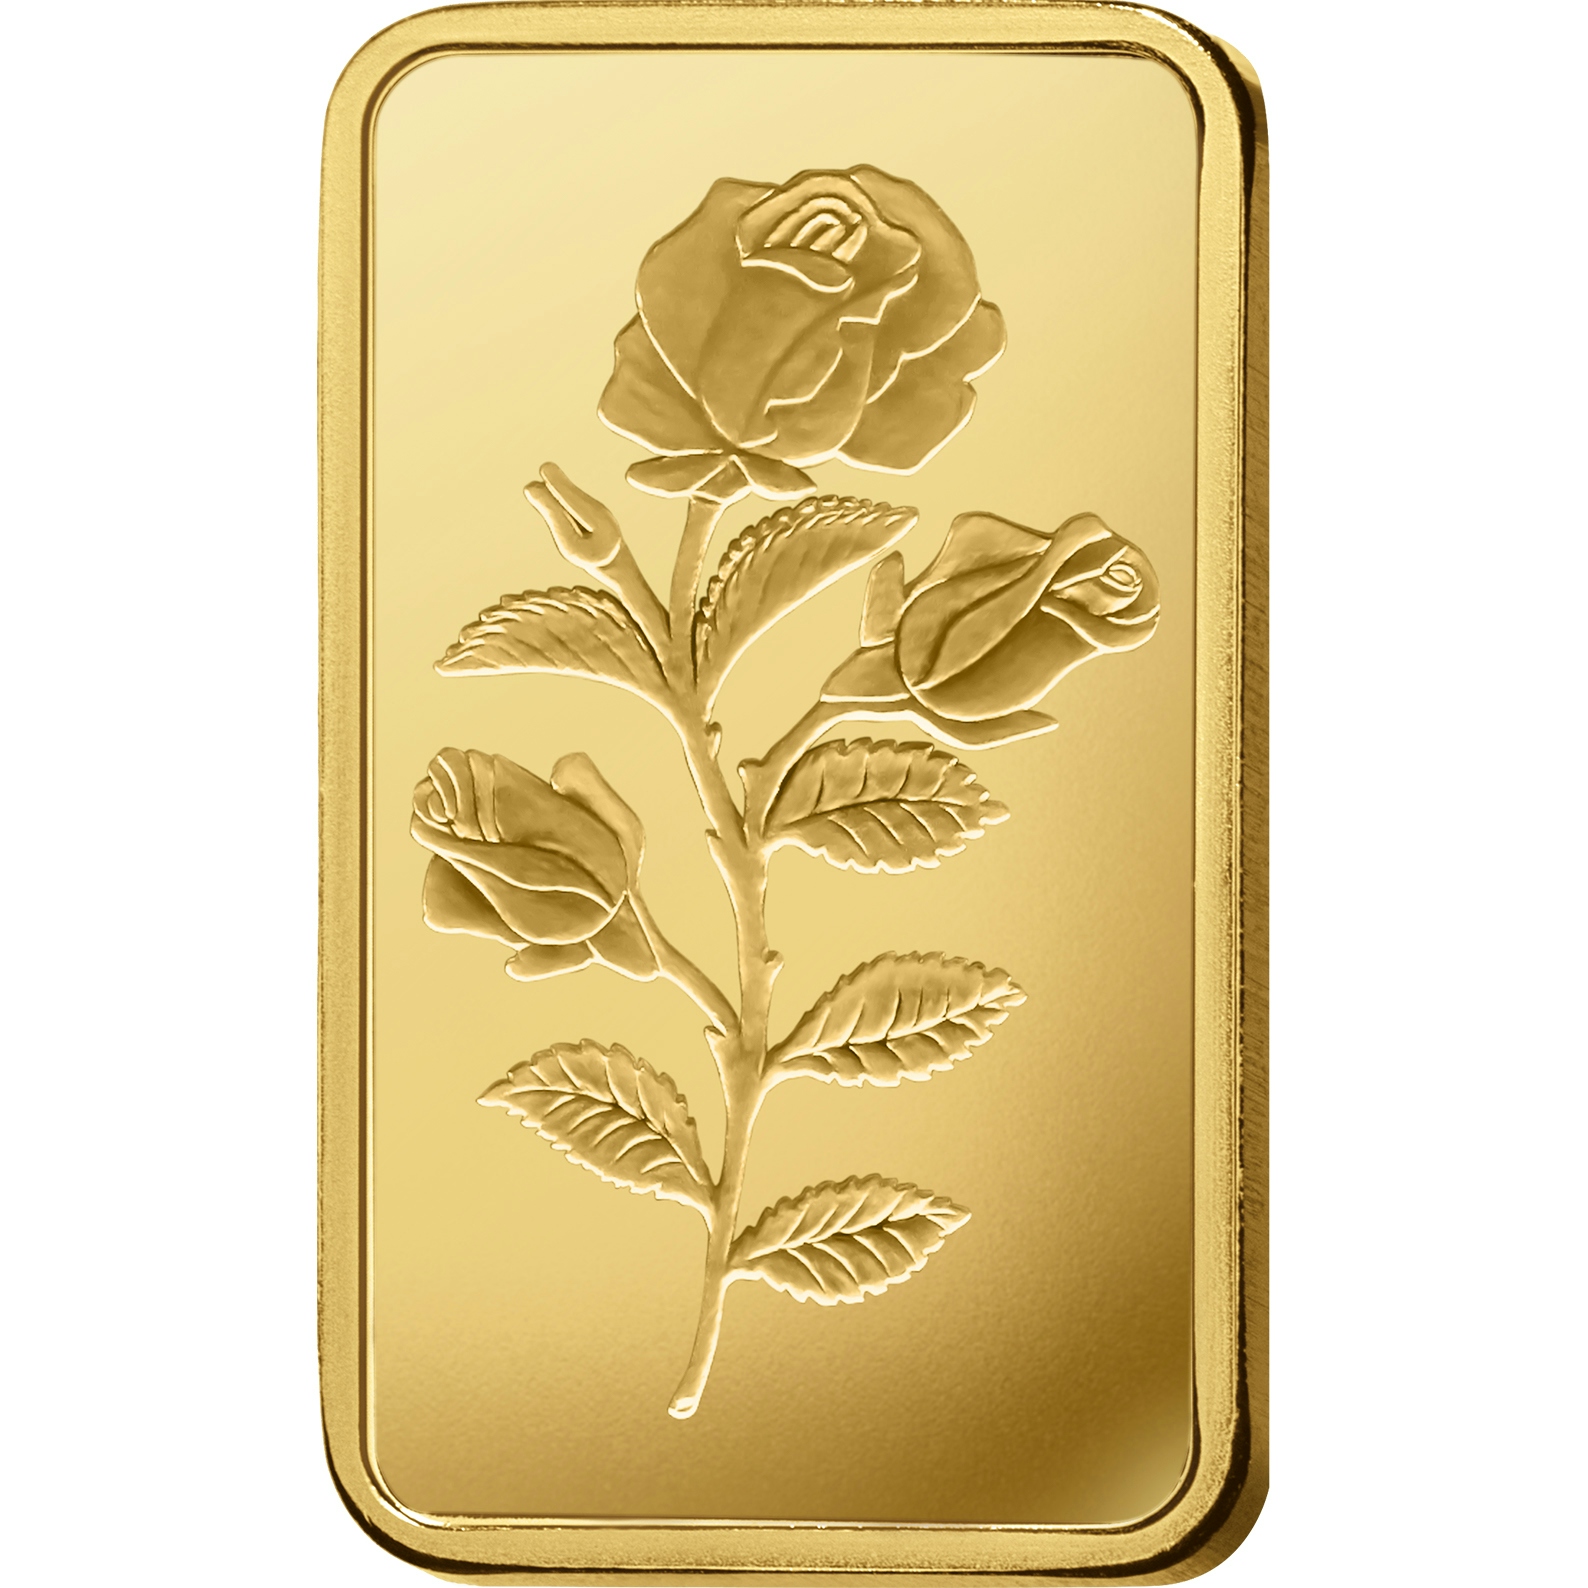 Achat d'or, 5 gram d'or pur Rosa - PAMP Suisse - Front 